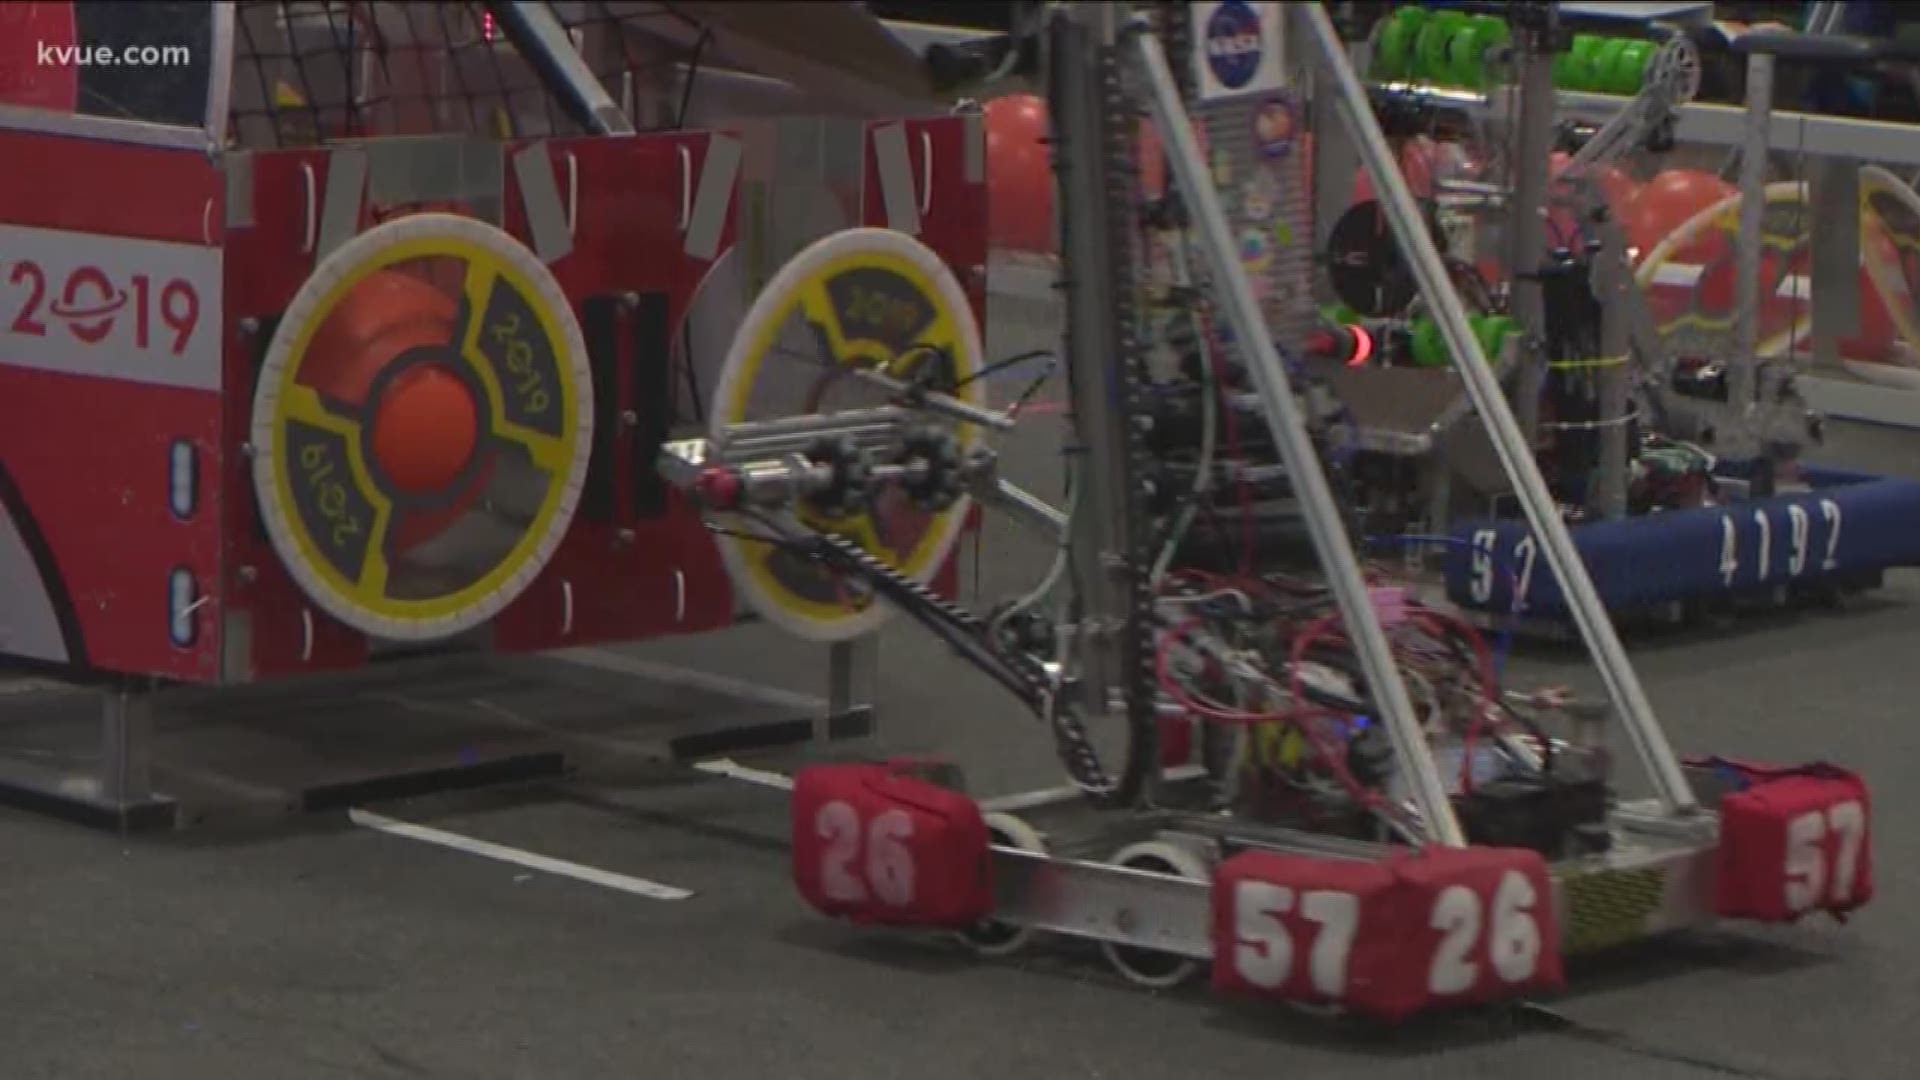 Two local high school robotics teams were competing Friday. Photojournalist Tom Rapp checked out how their robots stacked up against the competition.